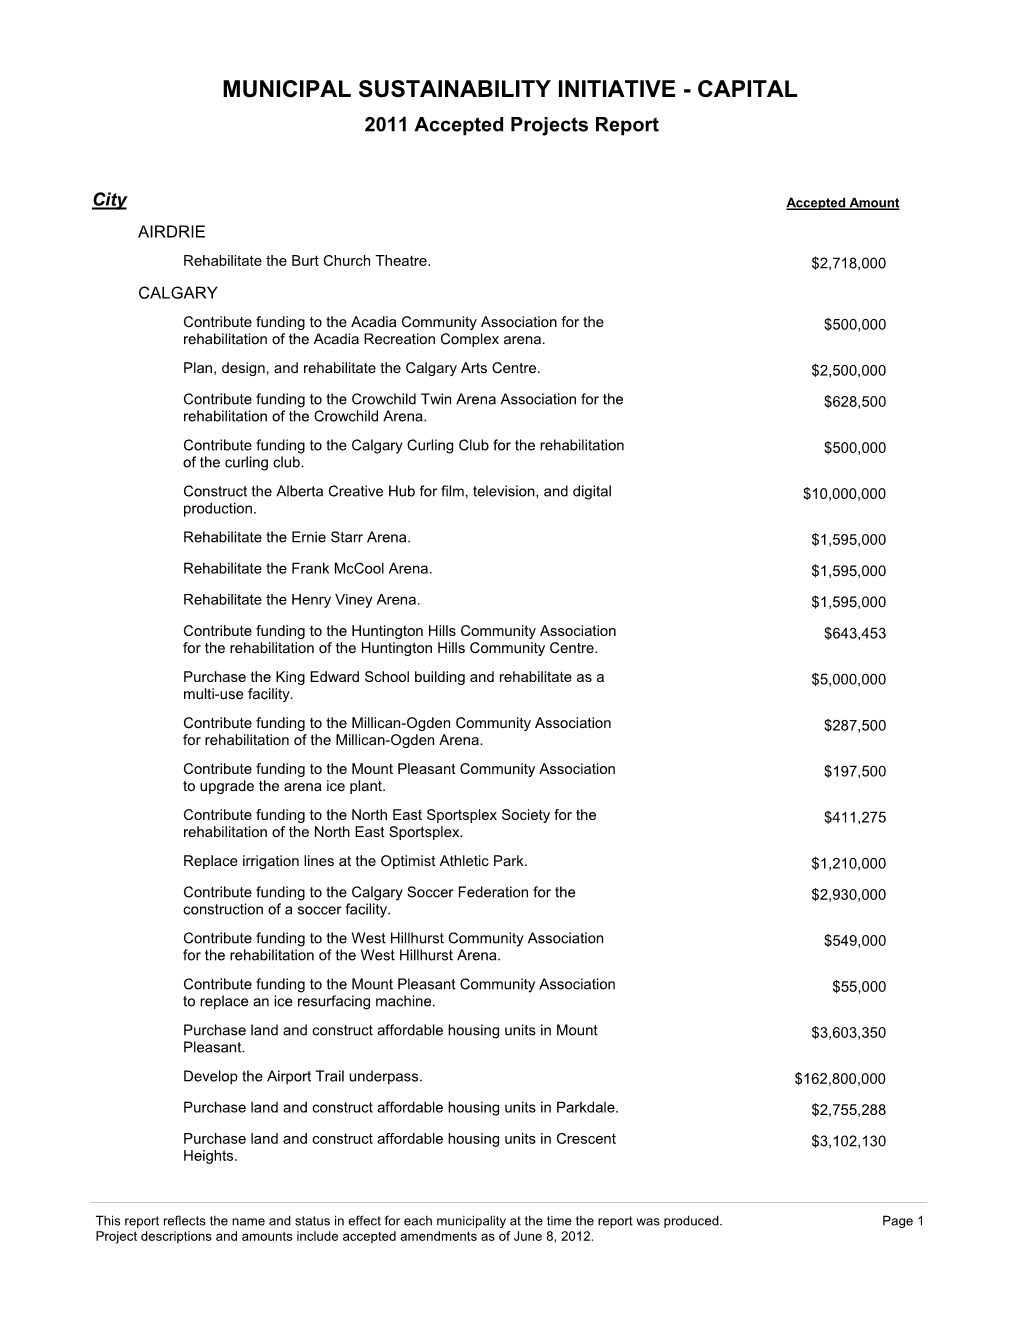 MUNICIPAL SUSTAINABILITY INITIATIVE - CAPITAL 2011 Accepted Projects Report